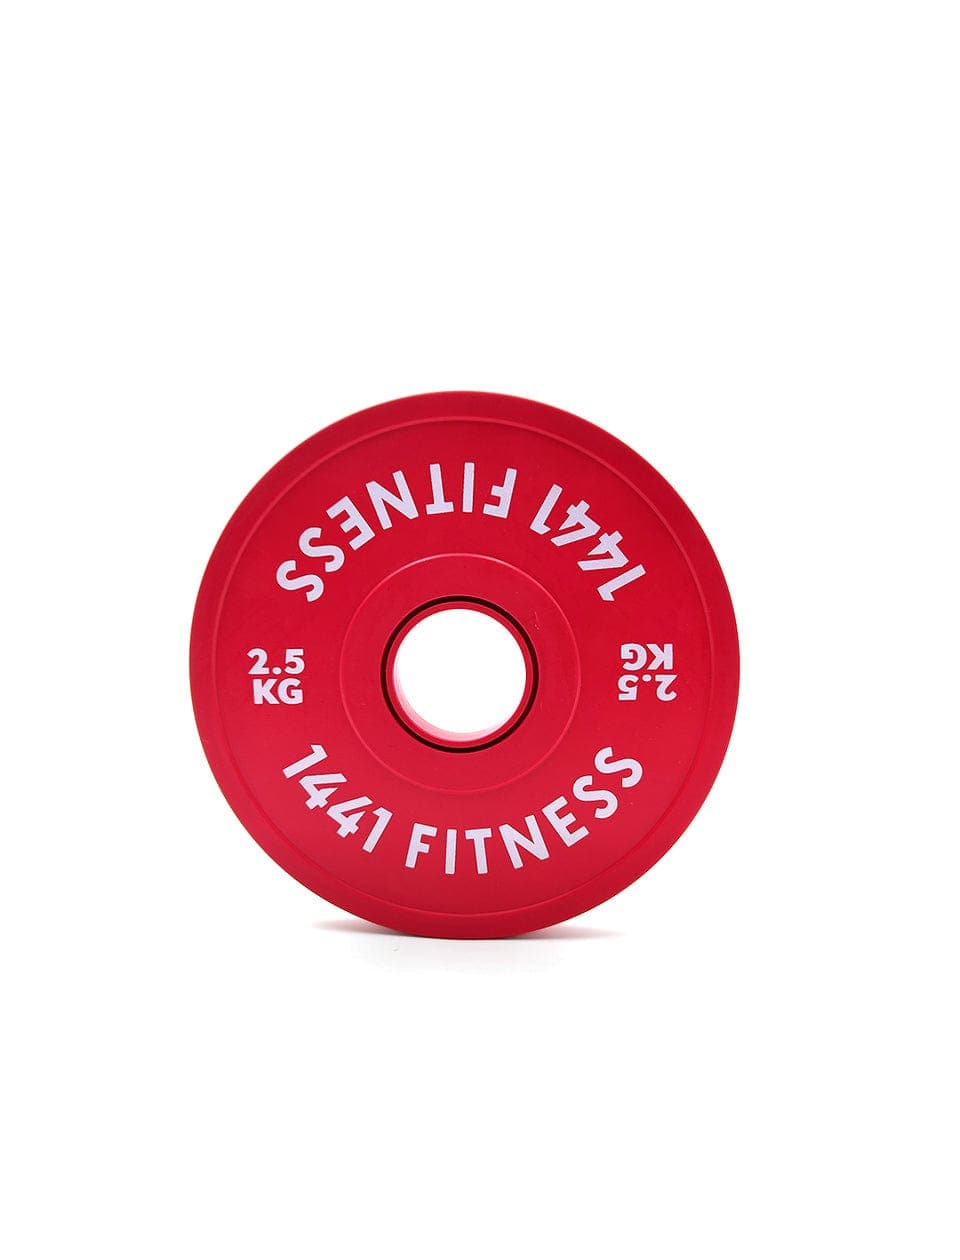 PRSAE Plates & Bars 2.5 KG 1441 Fitness Fractional Bumper Weight Plates 0.5 kg to 2.5 Kg - Sold as Per Piece